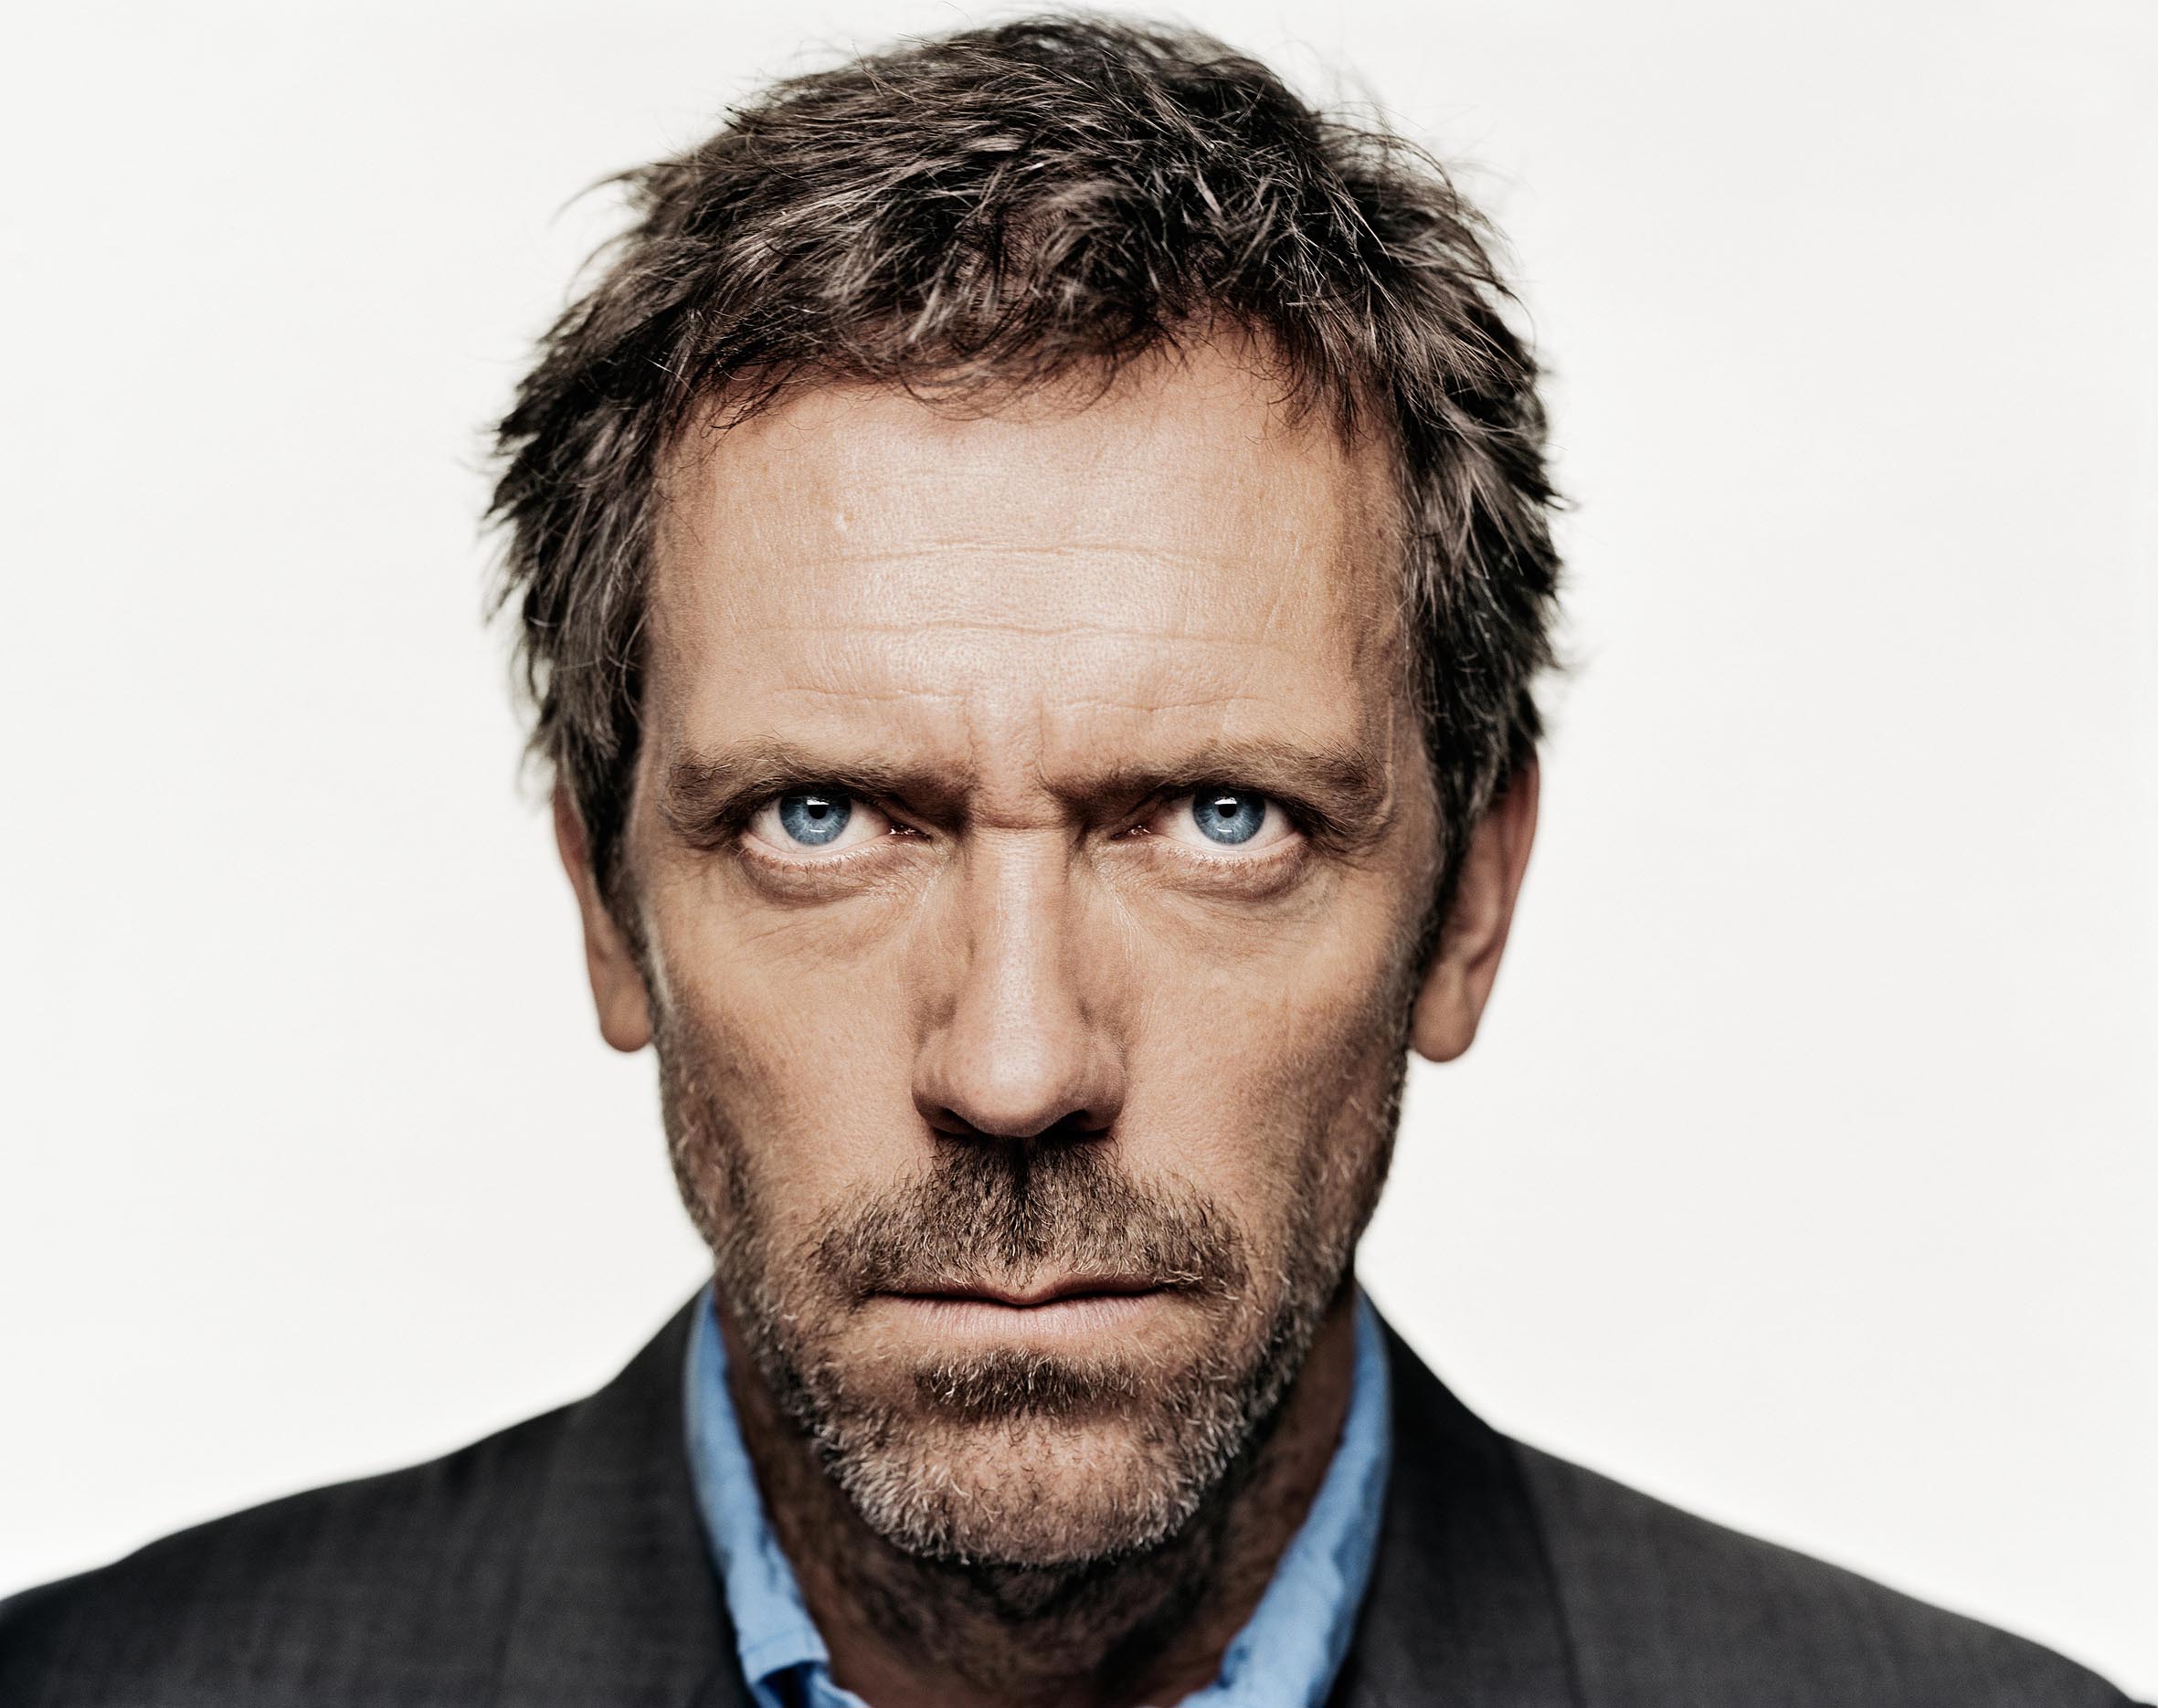 Dr. Gregory House, portrayed by actor Hugh Laurie.